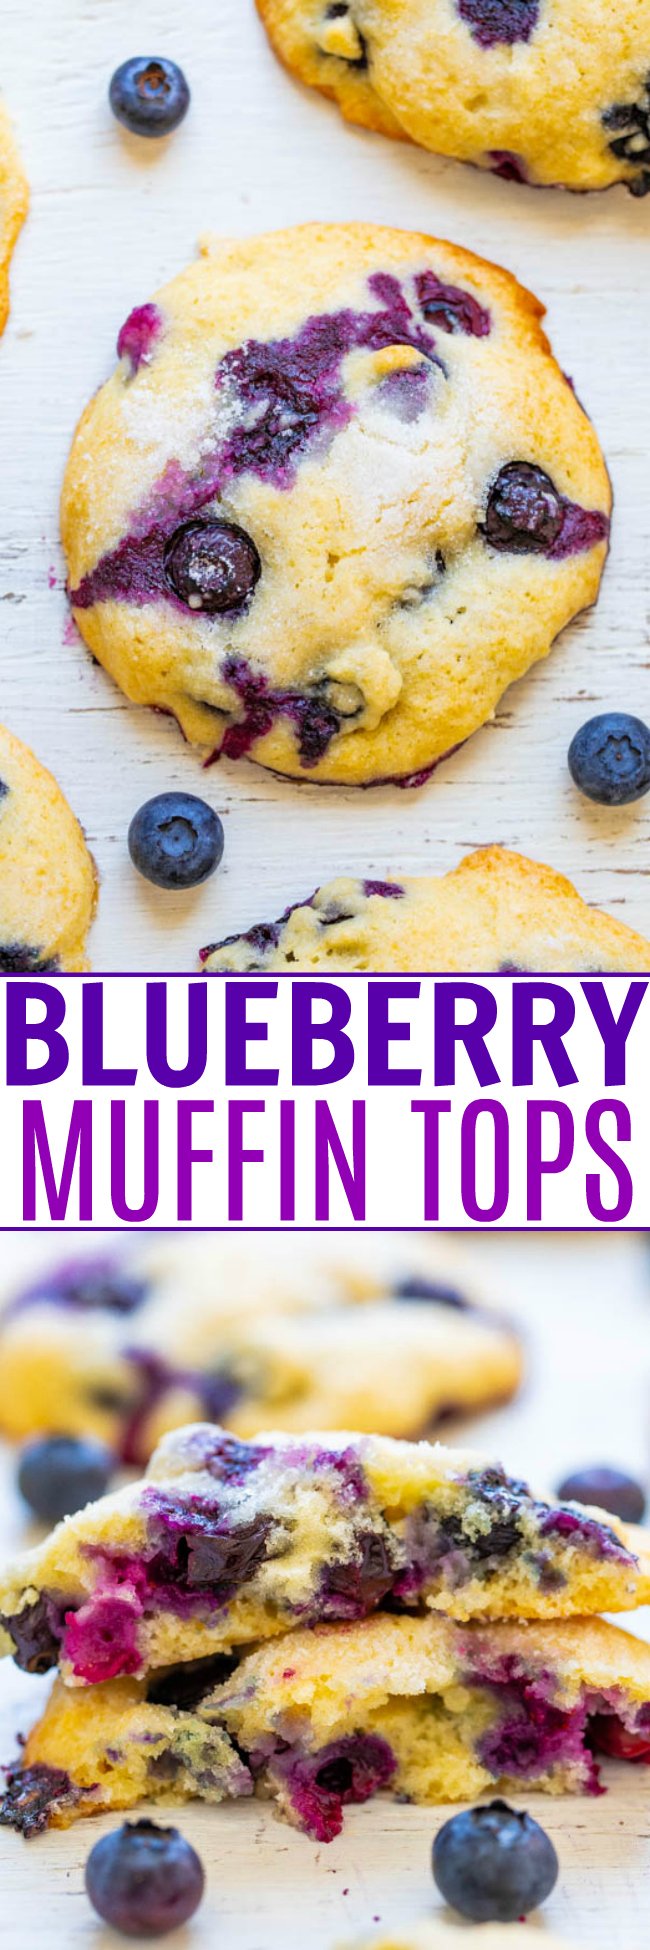 Blueberry Muffin Tops - If you like to eat just the tops of your muffins, you're going to LOVE this EASY recipe for soft and tender blueberry muffin tops bursting with juicy berries in every bite!! Only 1/2 cup sugar in the entire batch!!